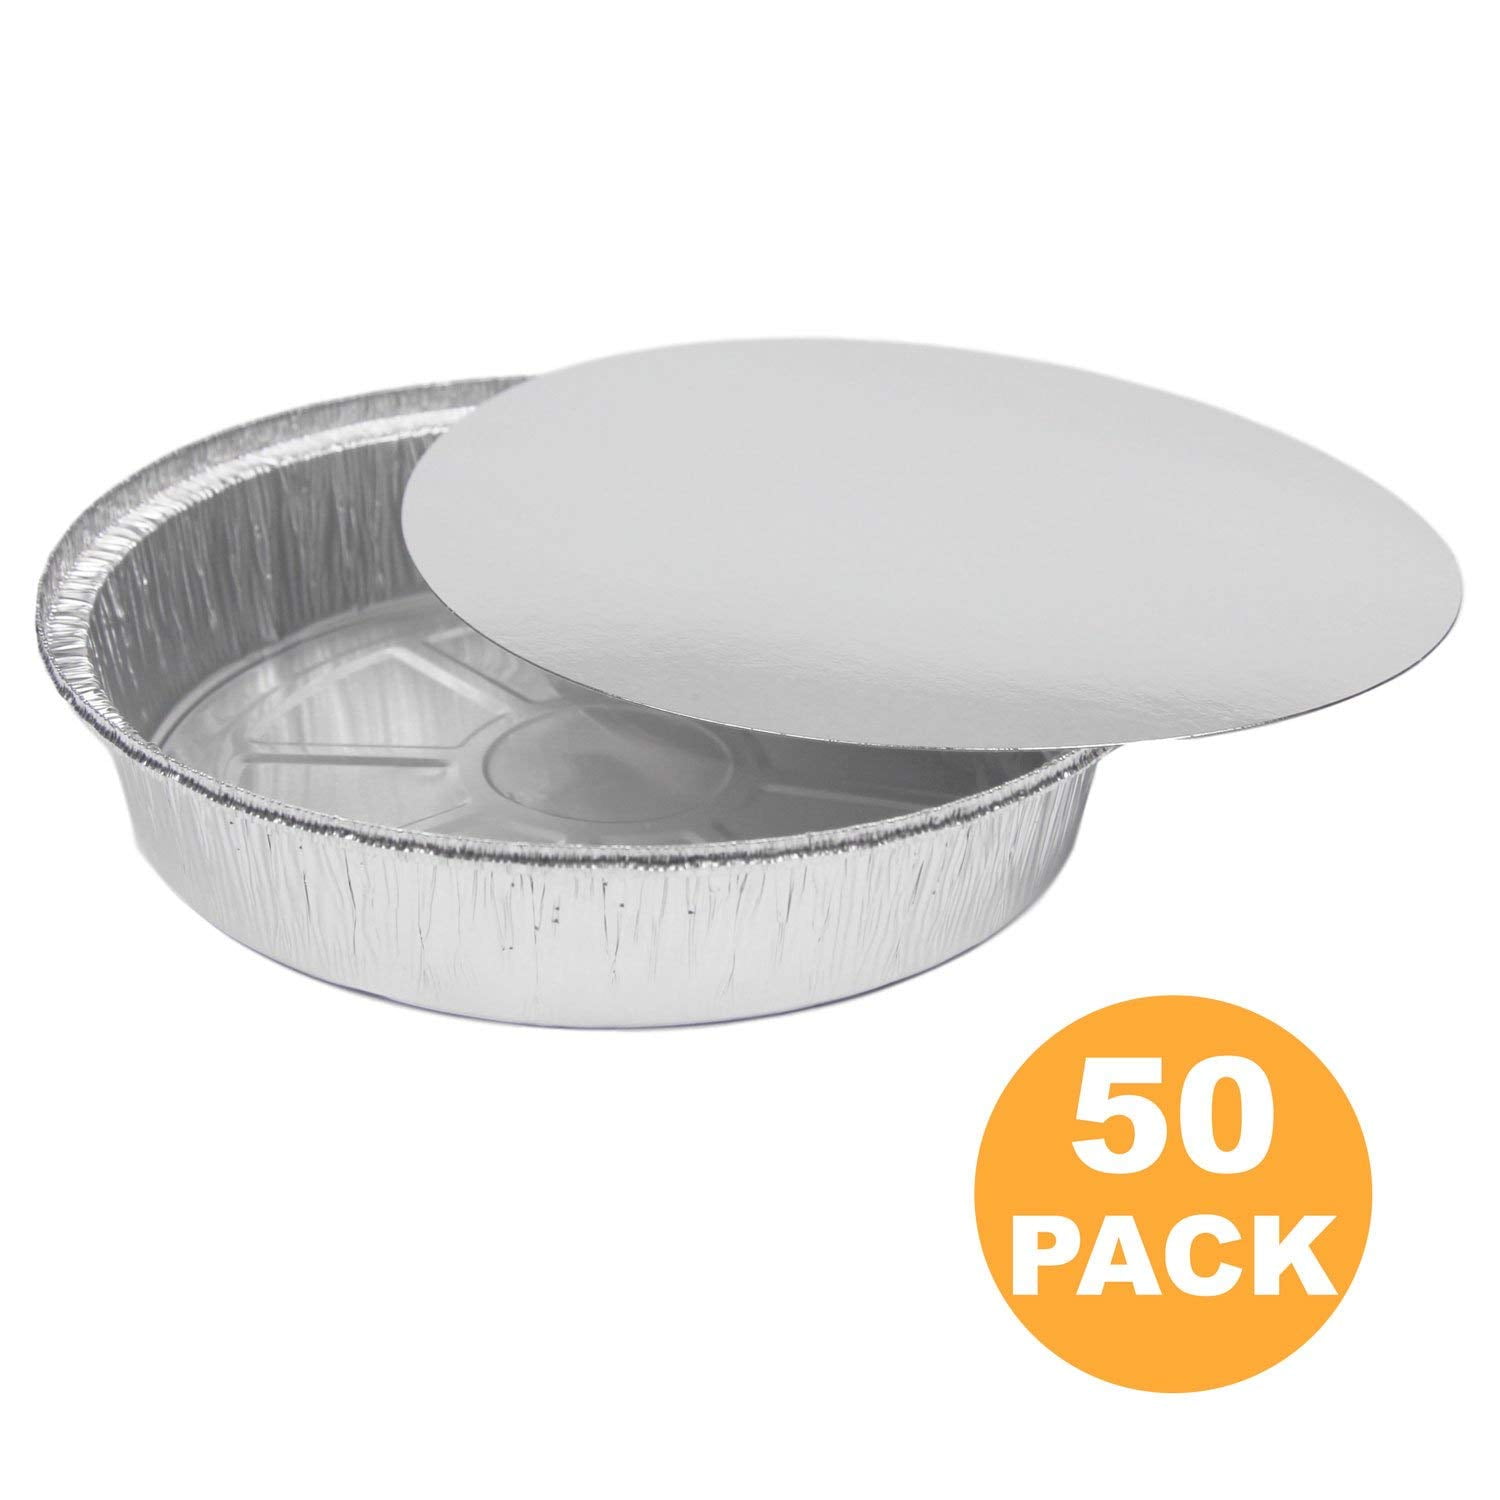 LIDS PERFECT FOR HOME & TAKEAWAY USE 200 X No9 ALUMINIUM FOIL FOOD CONTAINERS 